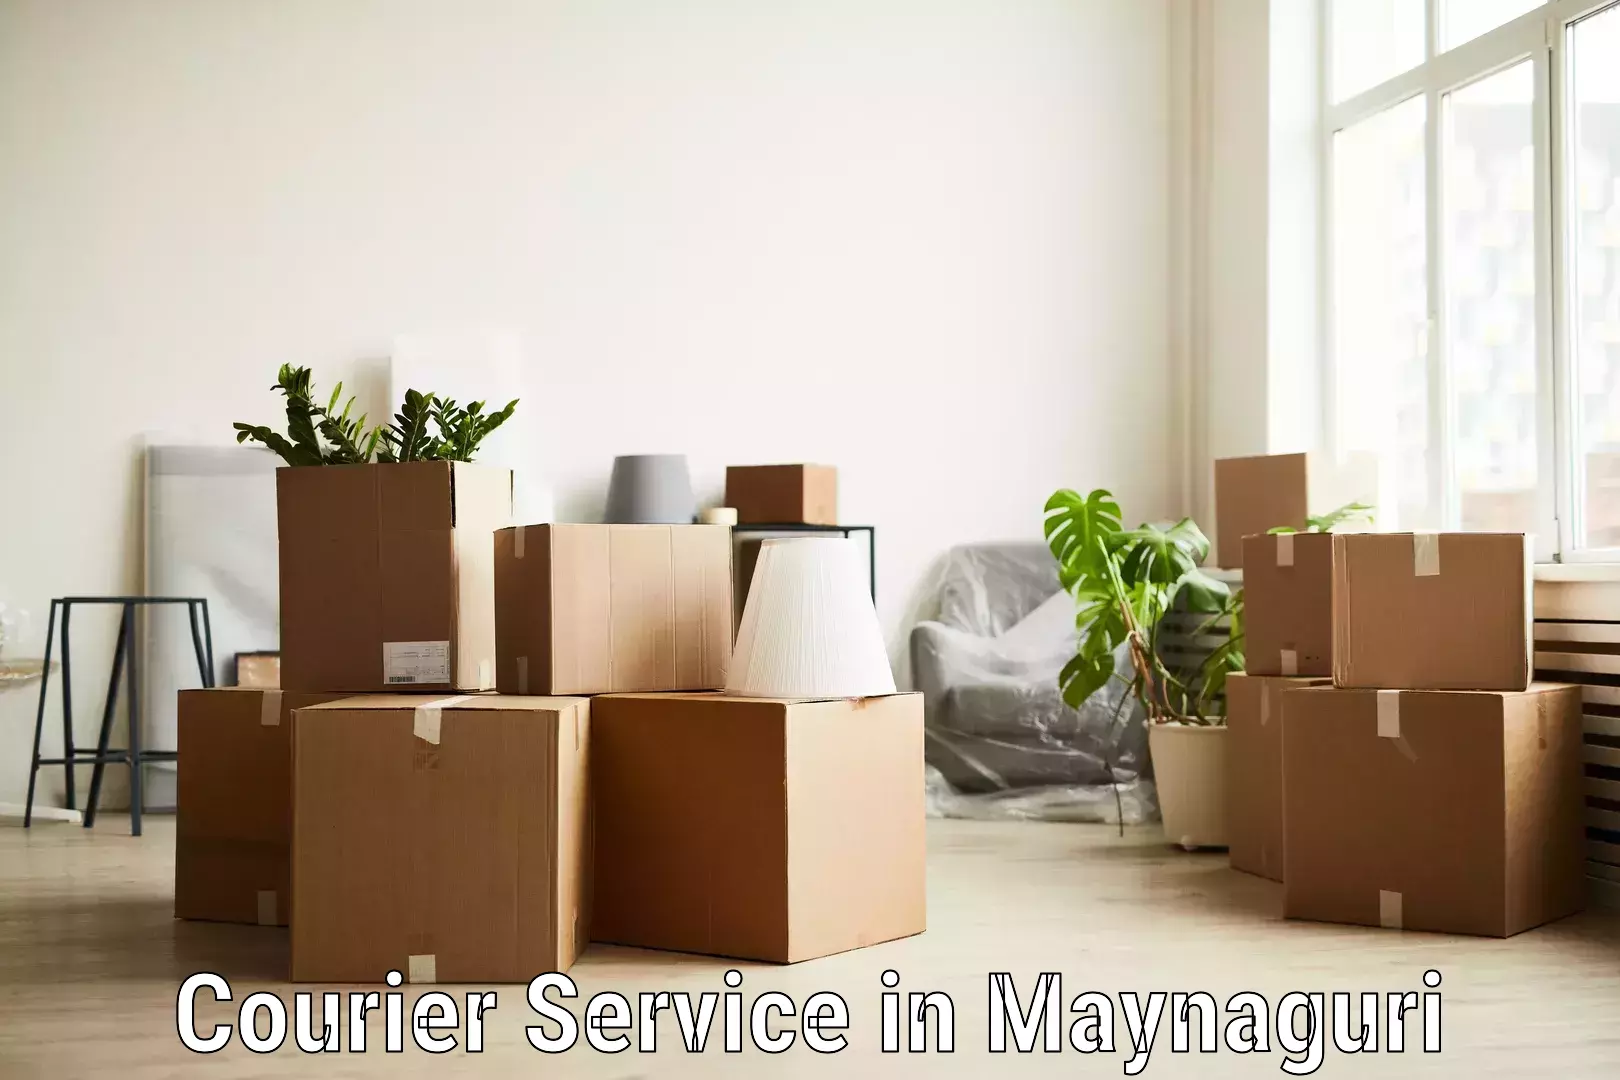 Automated shipping processes in Maynaguri